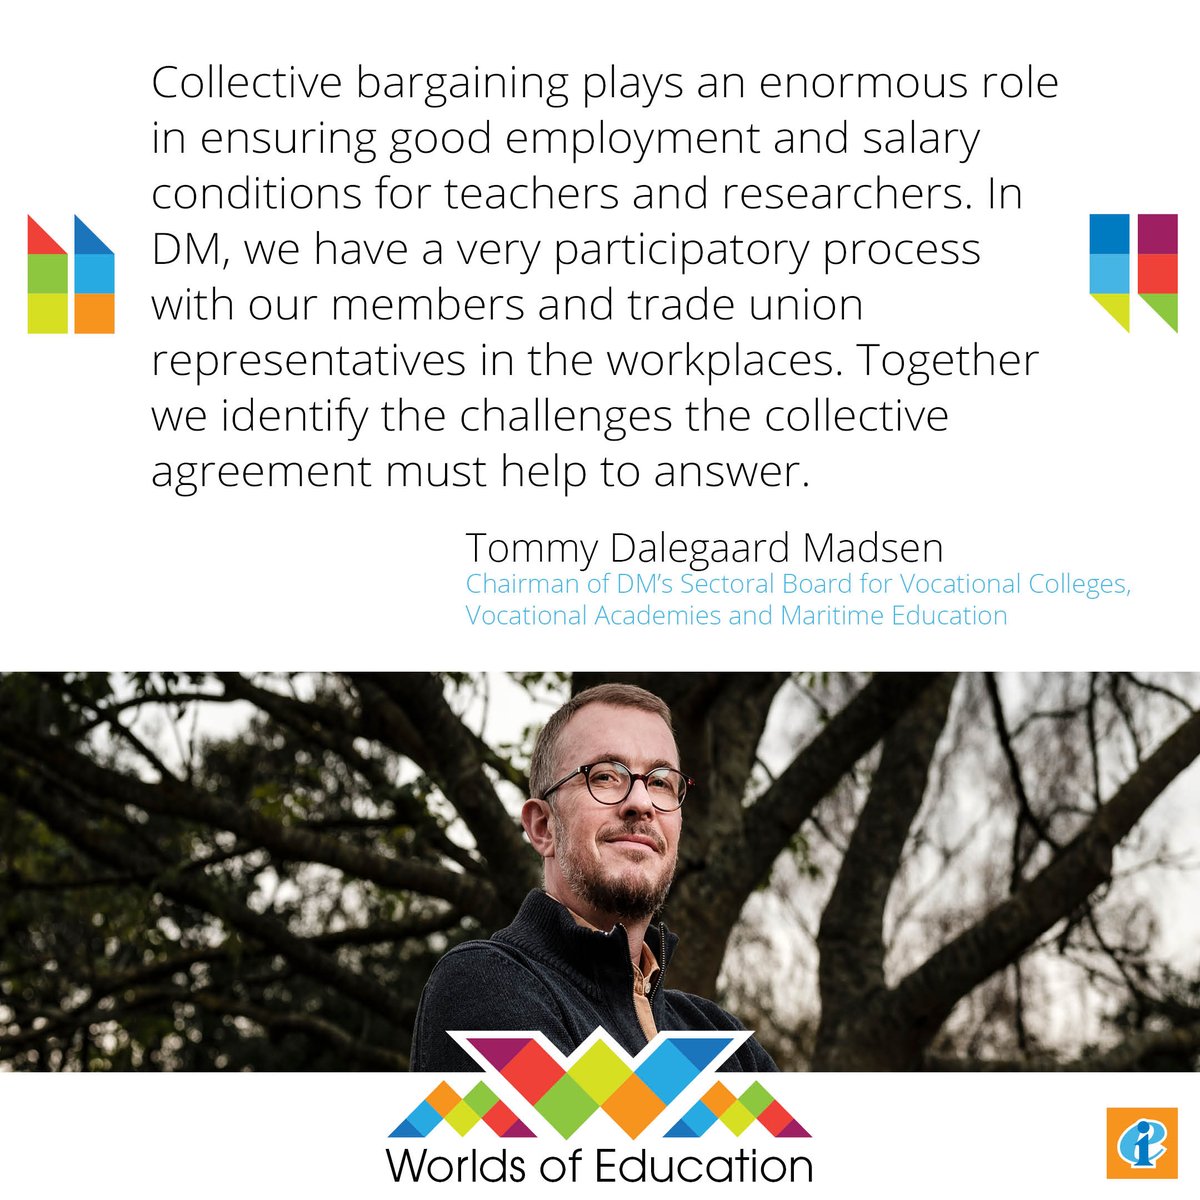 Respecting and valuing teachers means engaging in meaningful social and policy dialogue with the profession. We sat down with @tommyDmadsen of @akademikerblad to discuss what social dialogue and collective bargaining mean in practice in Denmark. ➡️ eiie.io/3xB1Q3M